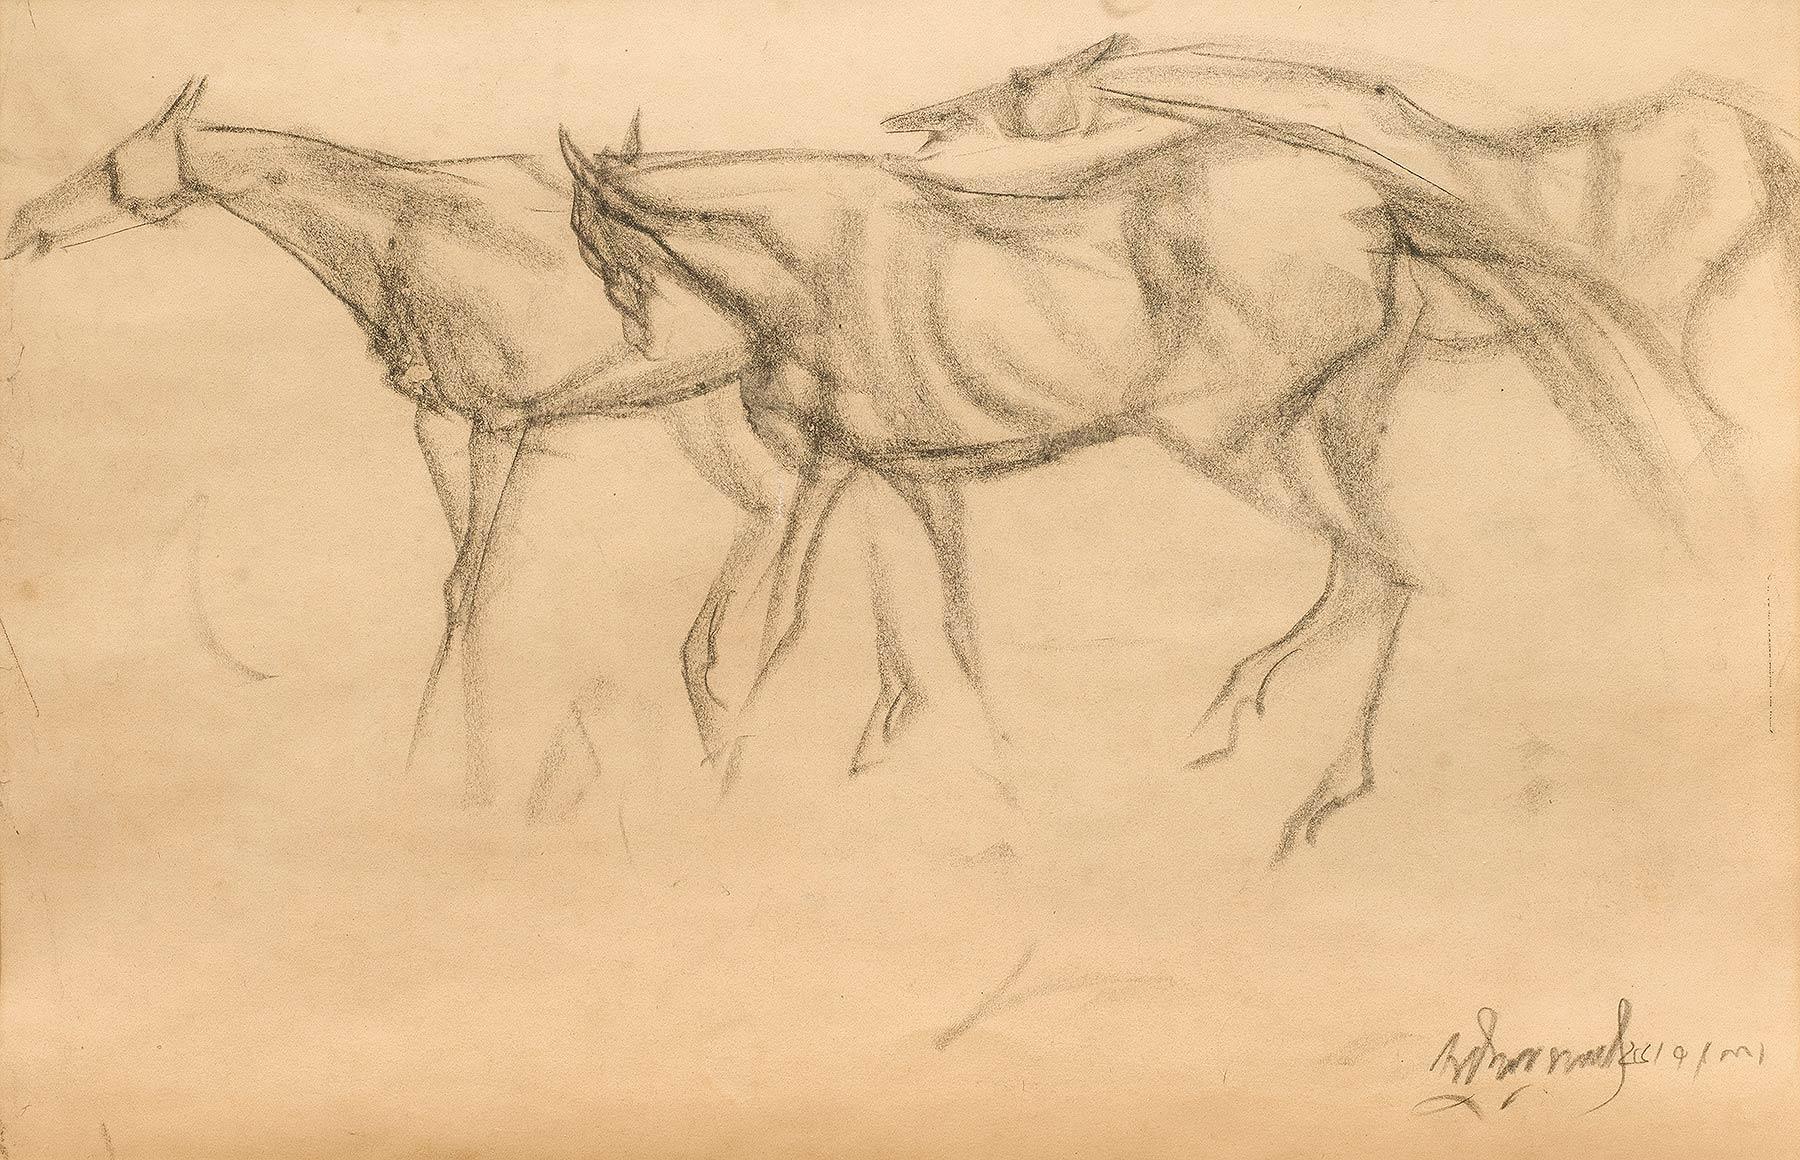 Sunil Das Animal Painting - Early Horses VII, Drawing, Charcoal on Paper, Black by Indian Artist "In Stock"